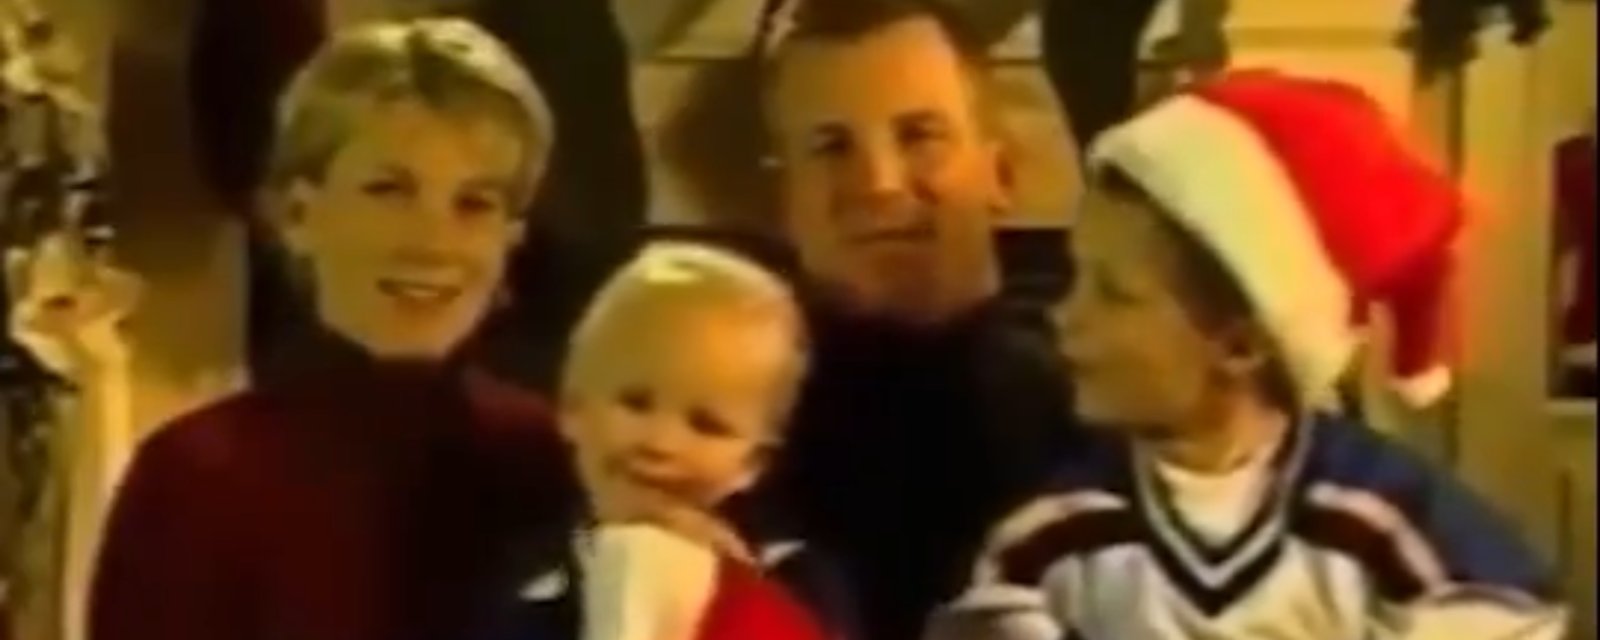 Flashback: Toddler Tkachuk brothers wish you a happy holiday